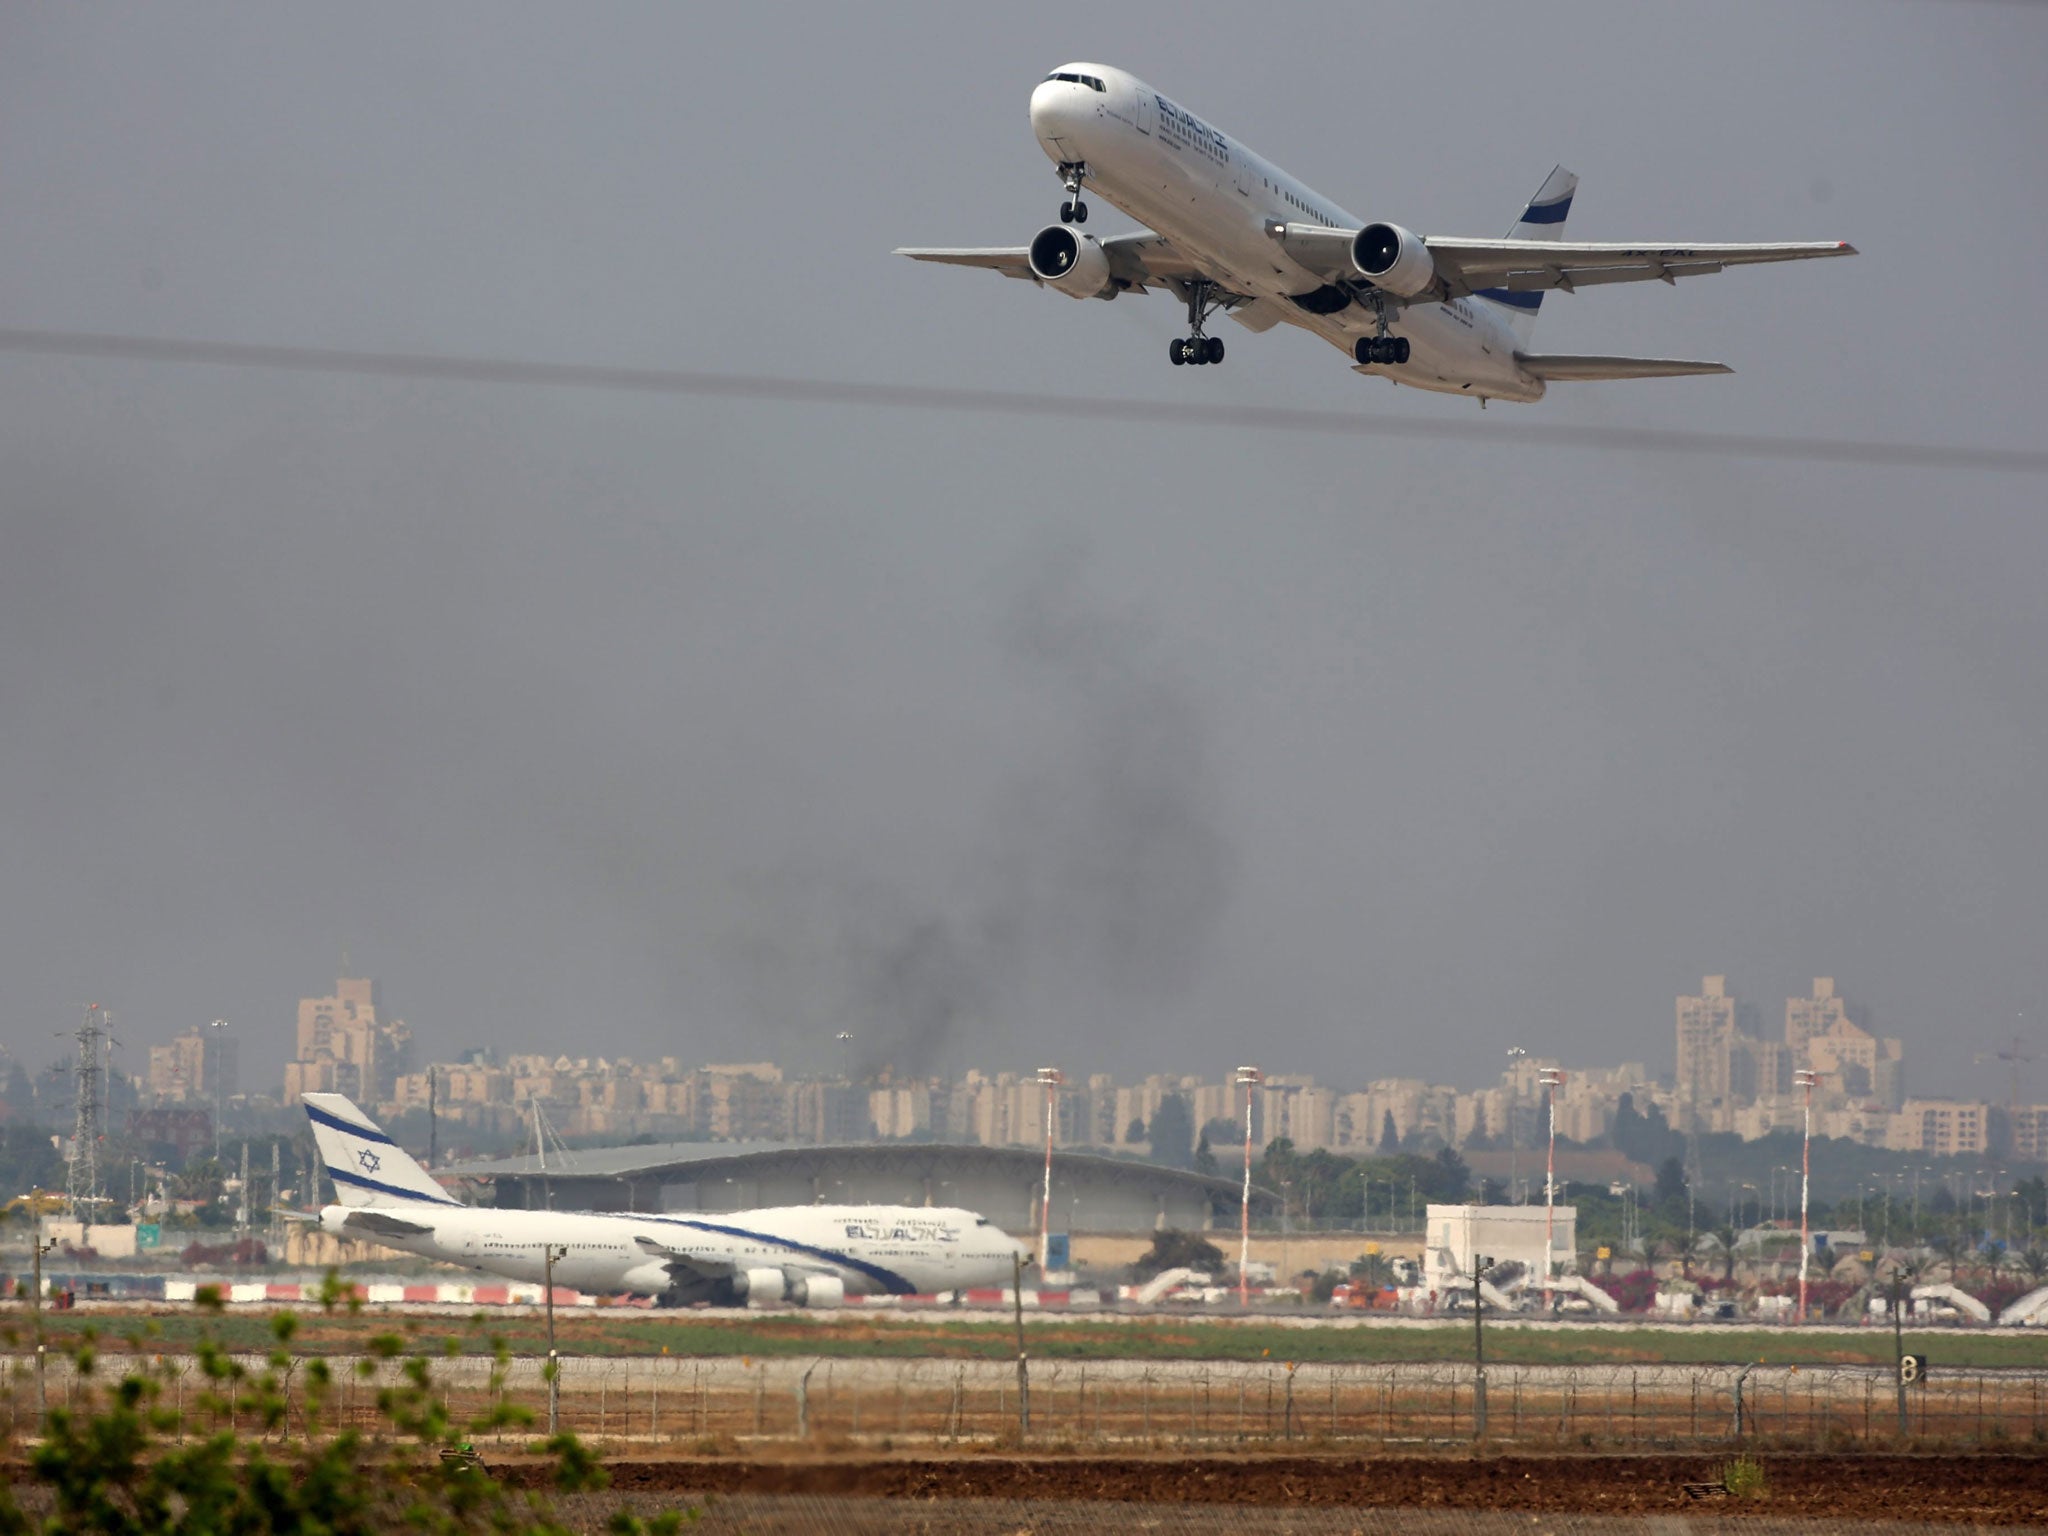 An Israeli aircraft taking off from Ben Gurion Airport, in Lod, Israel, outside Tel Aviv, 22 July 2014